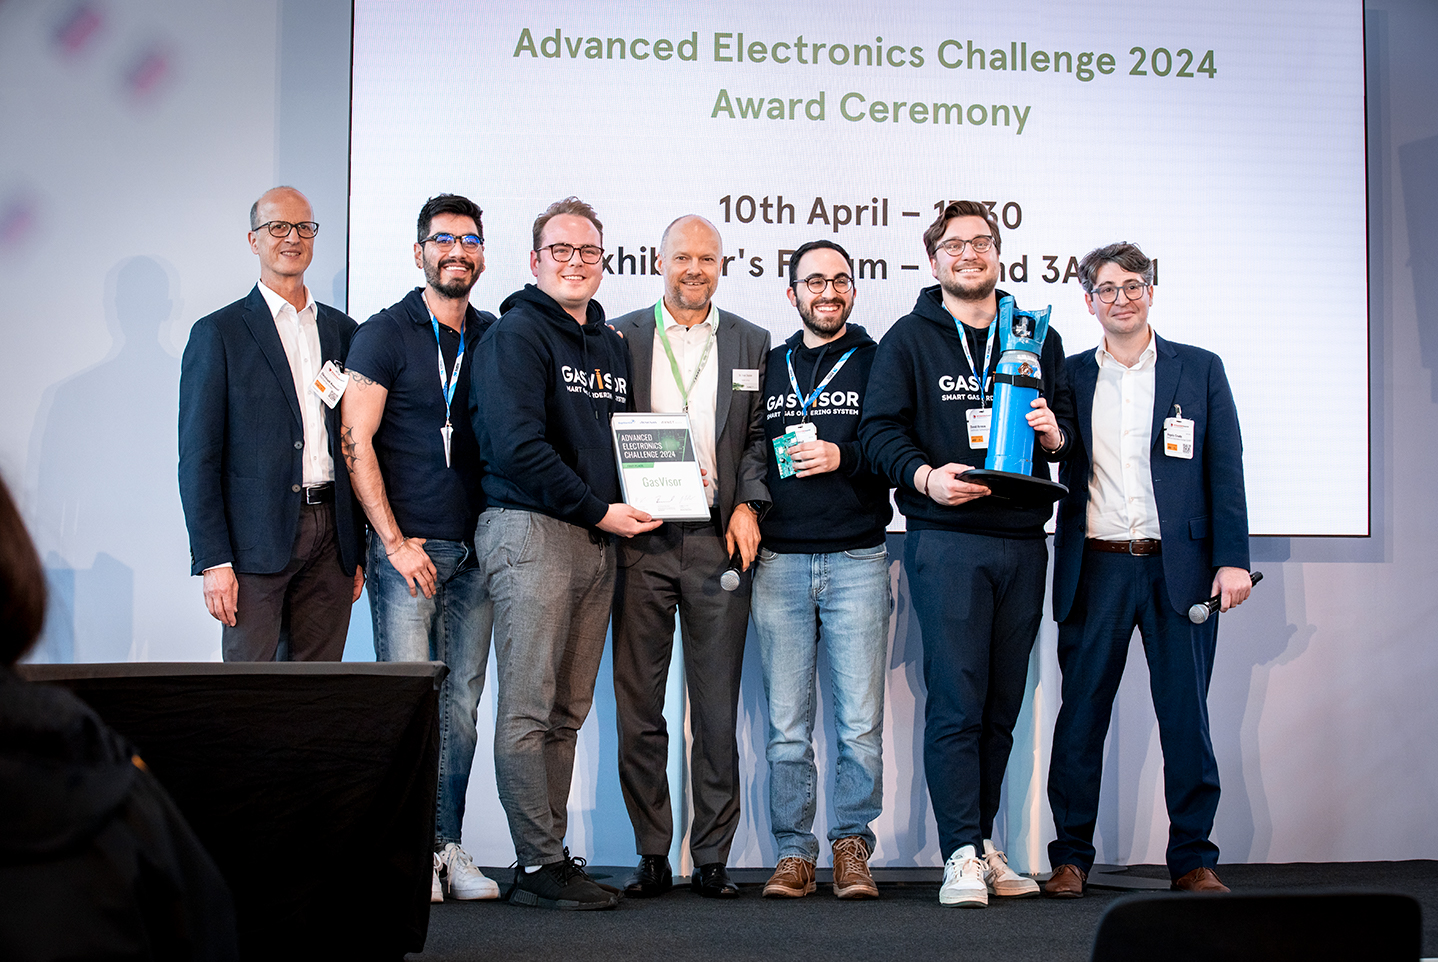 Avnet Silica Avnet Silica presented GasVisor with the Advanced Electronics Challenge award at embedded world 2024